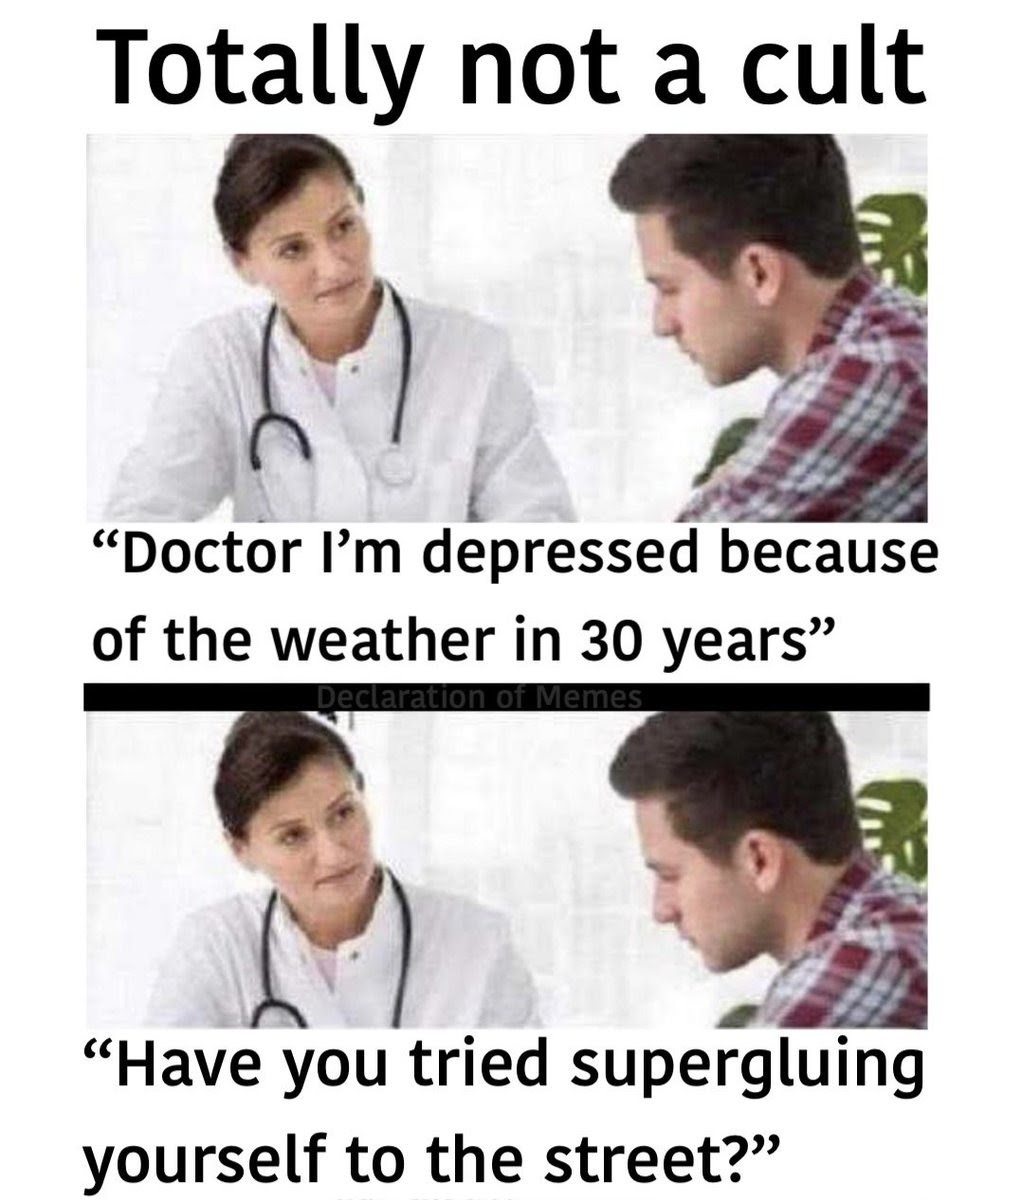 Meme where doctor suggests to patient that superglueing oneself to the street is a good idea.